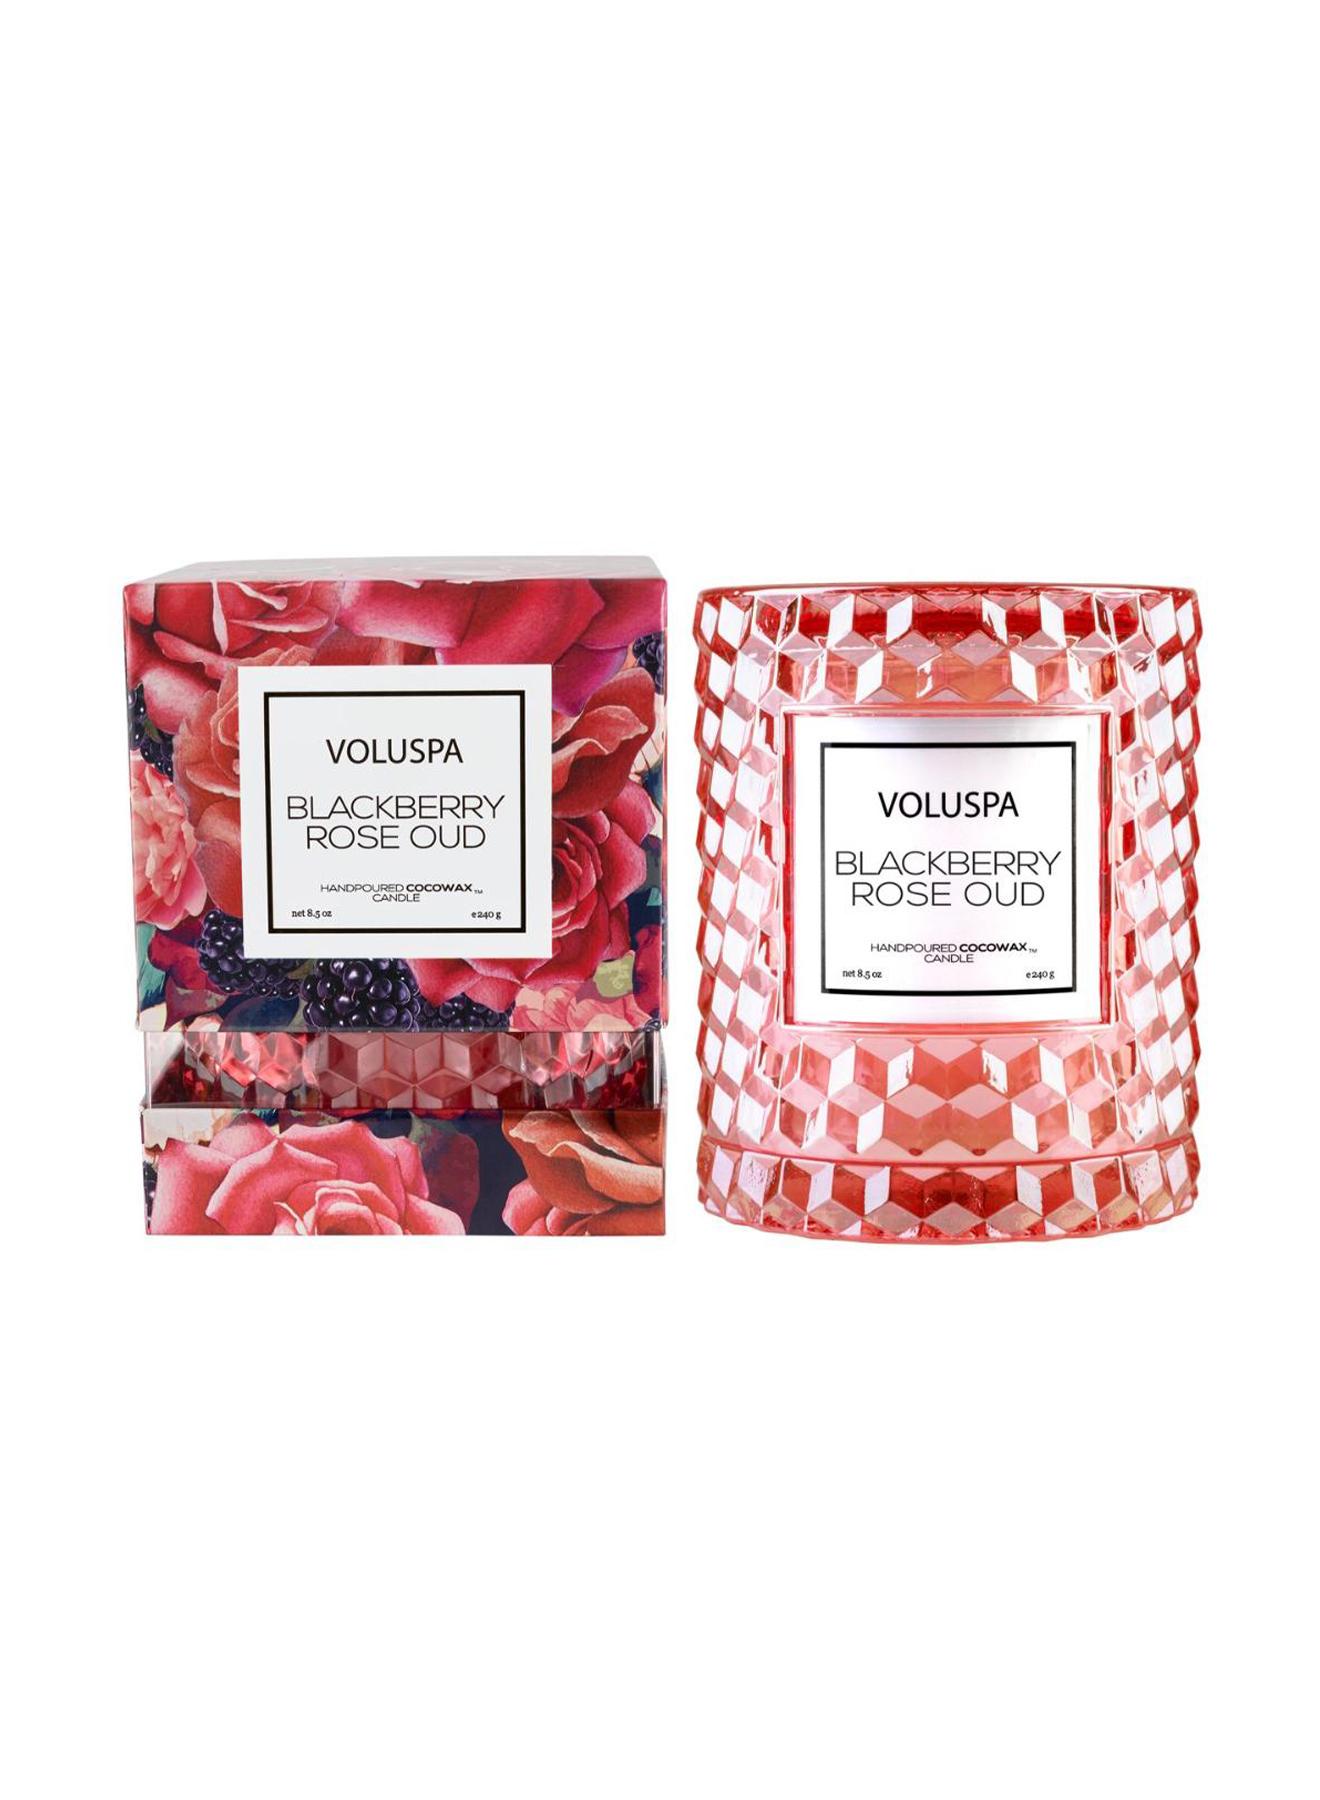 Blackberry rose oud cloche candle - 2